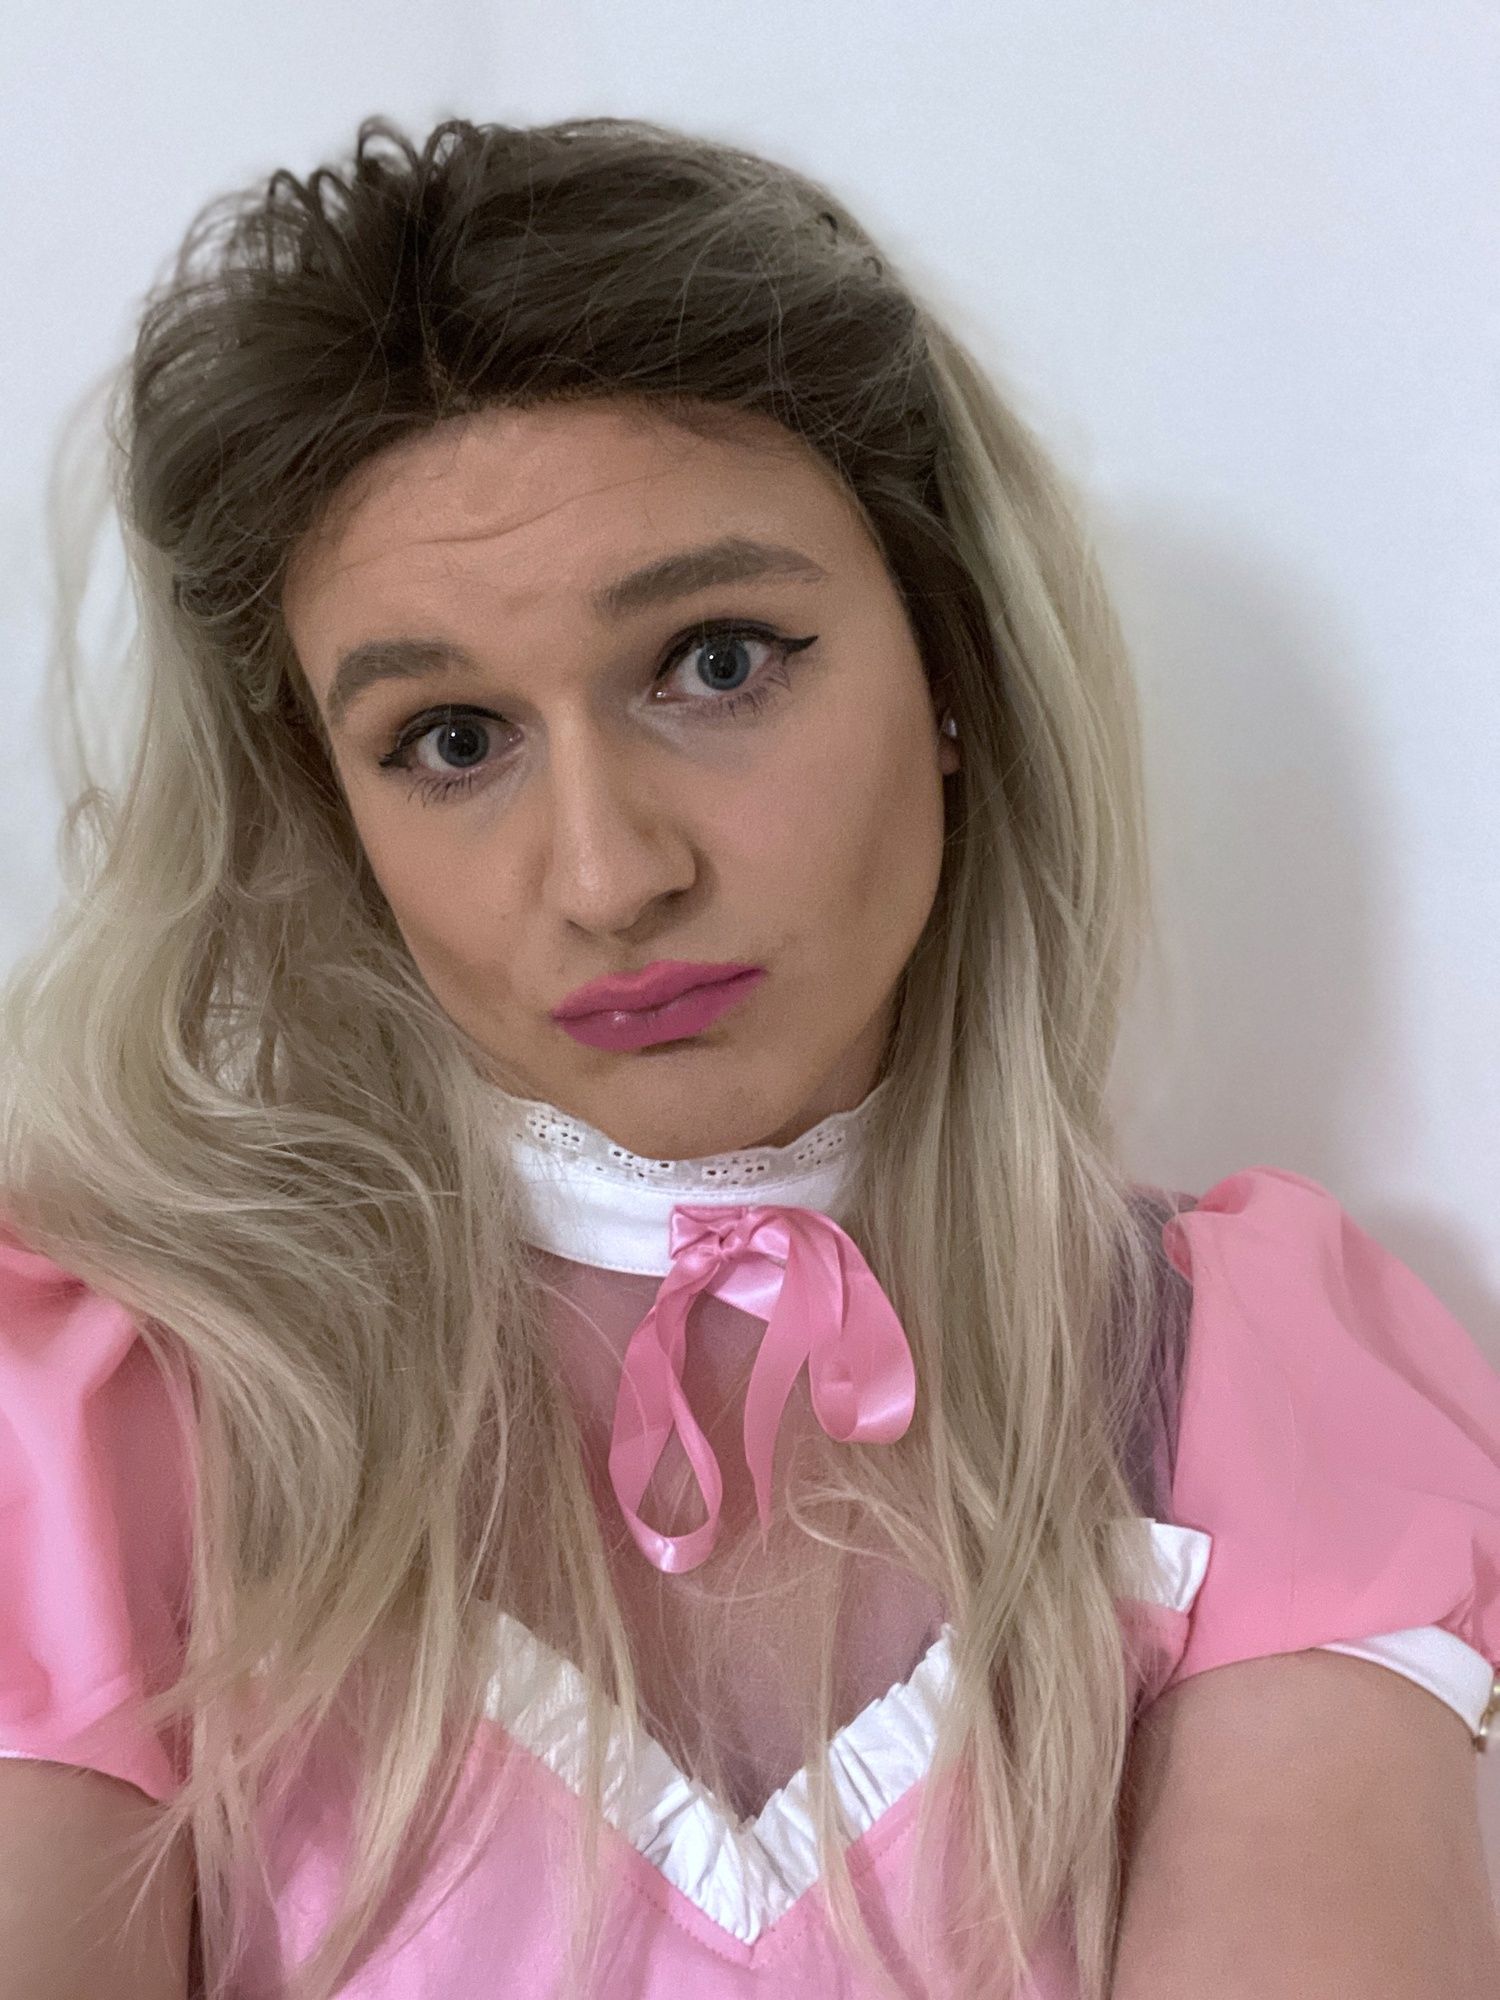 Sissy vallicxte in pink #7